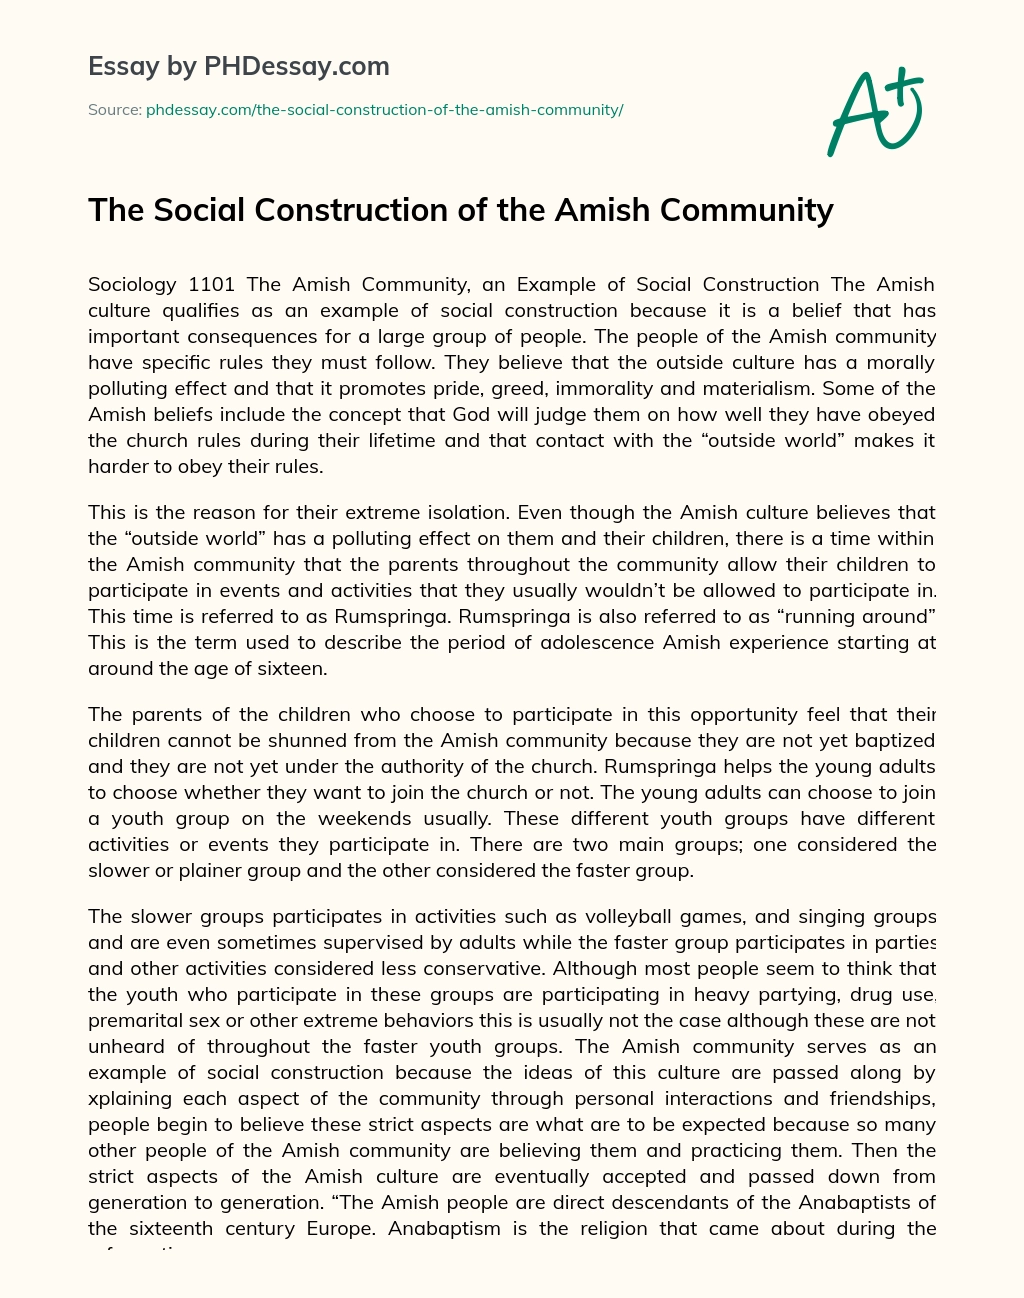 The Social Construction of the Amish Community essay